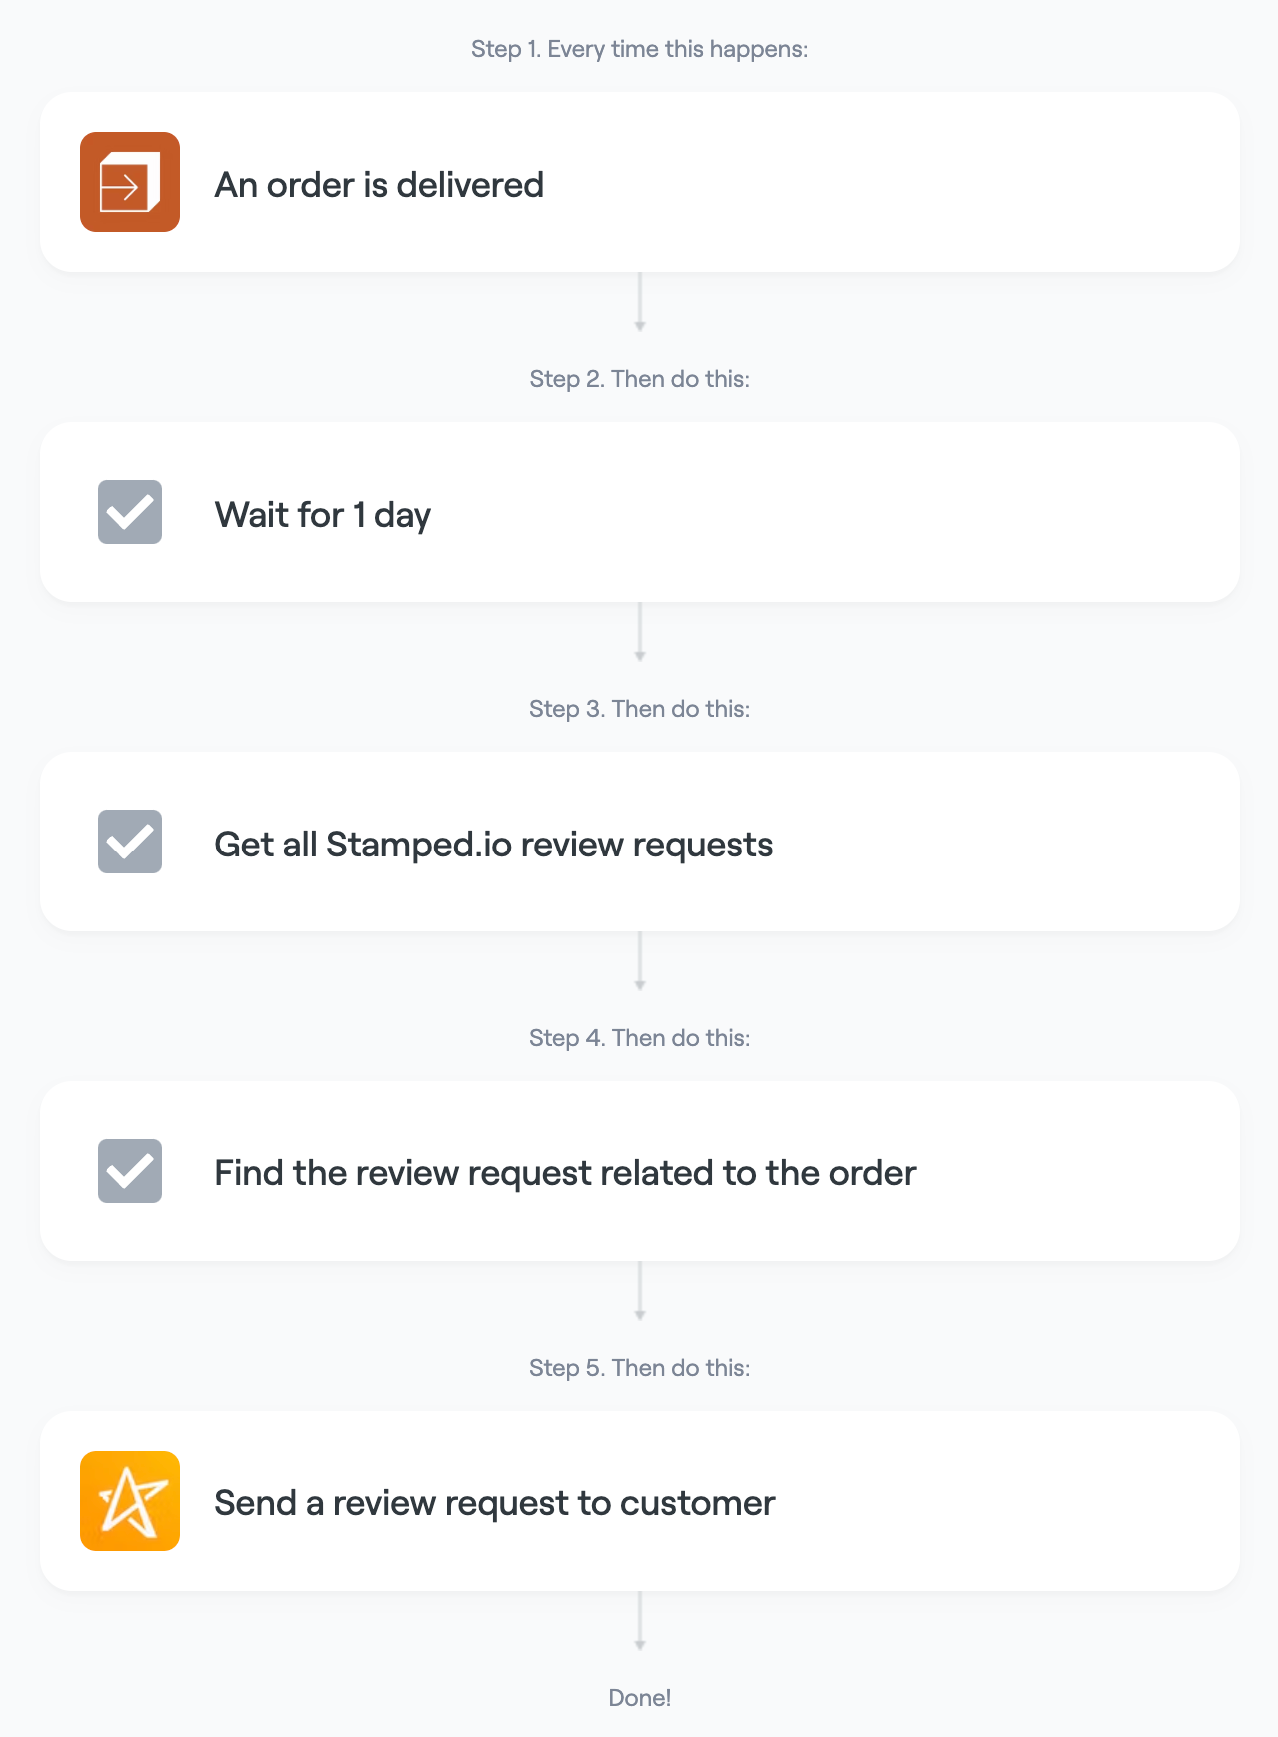 Send a review request after an order has been delivered